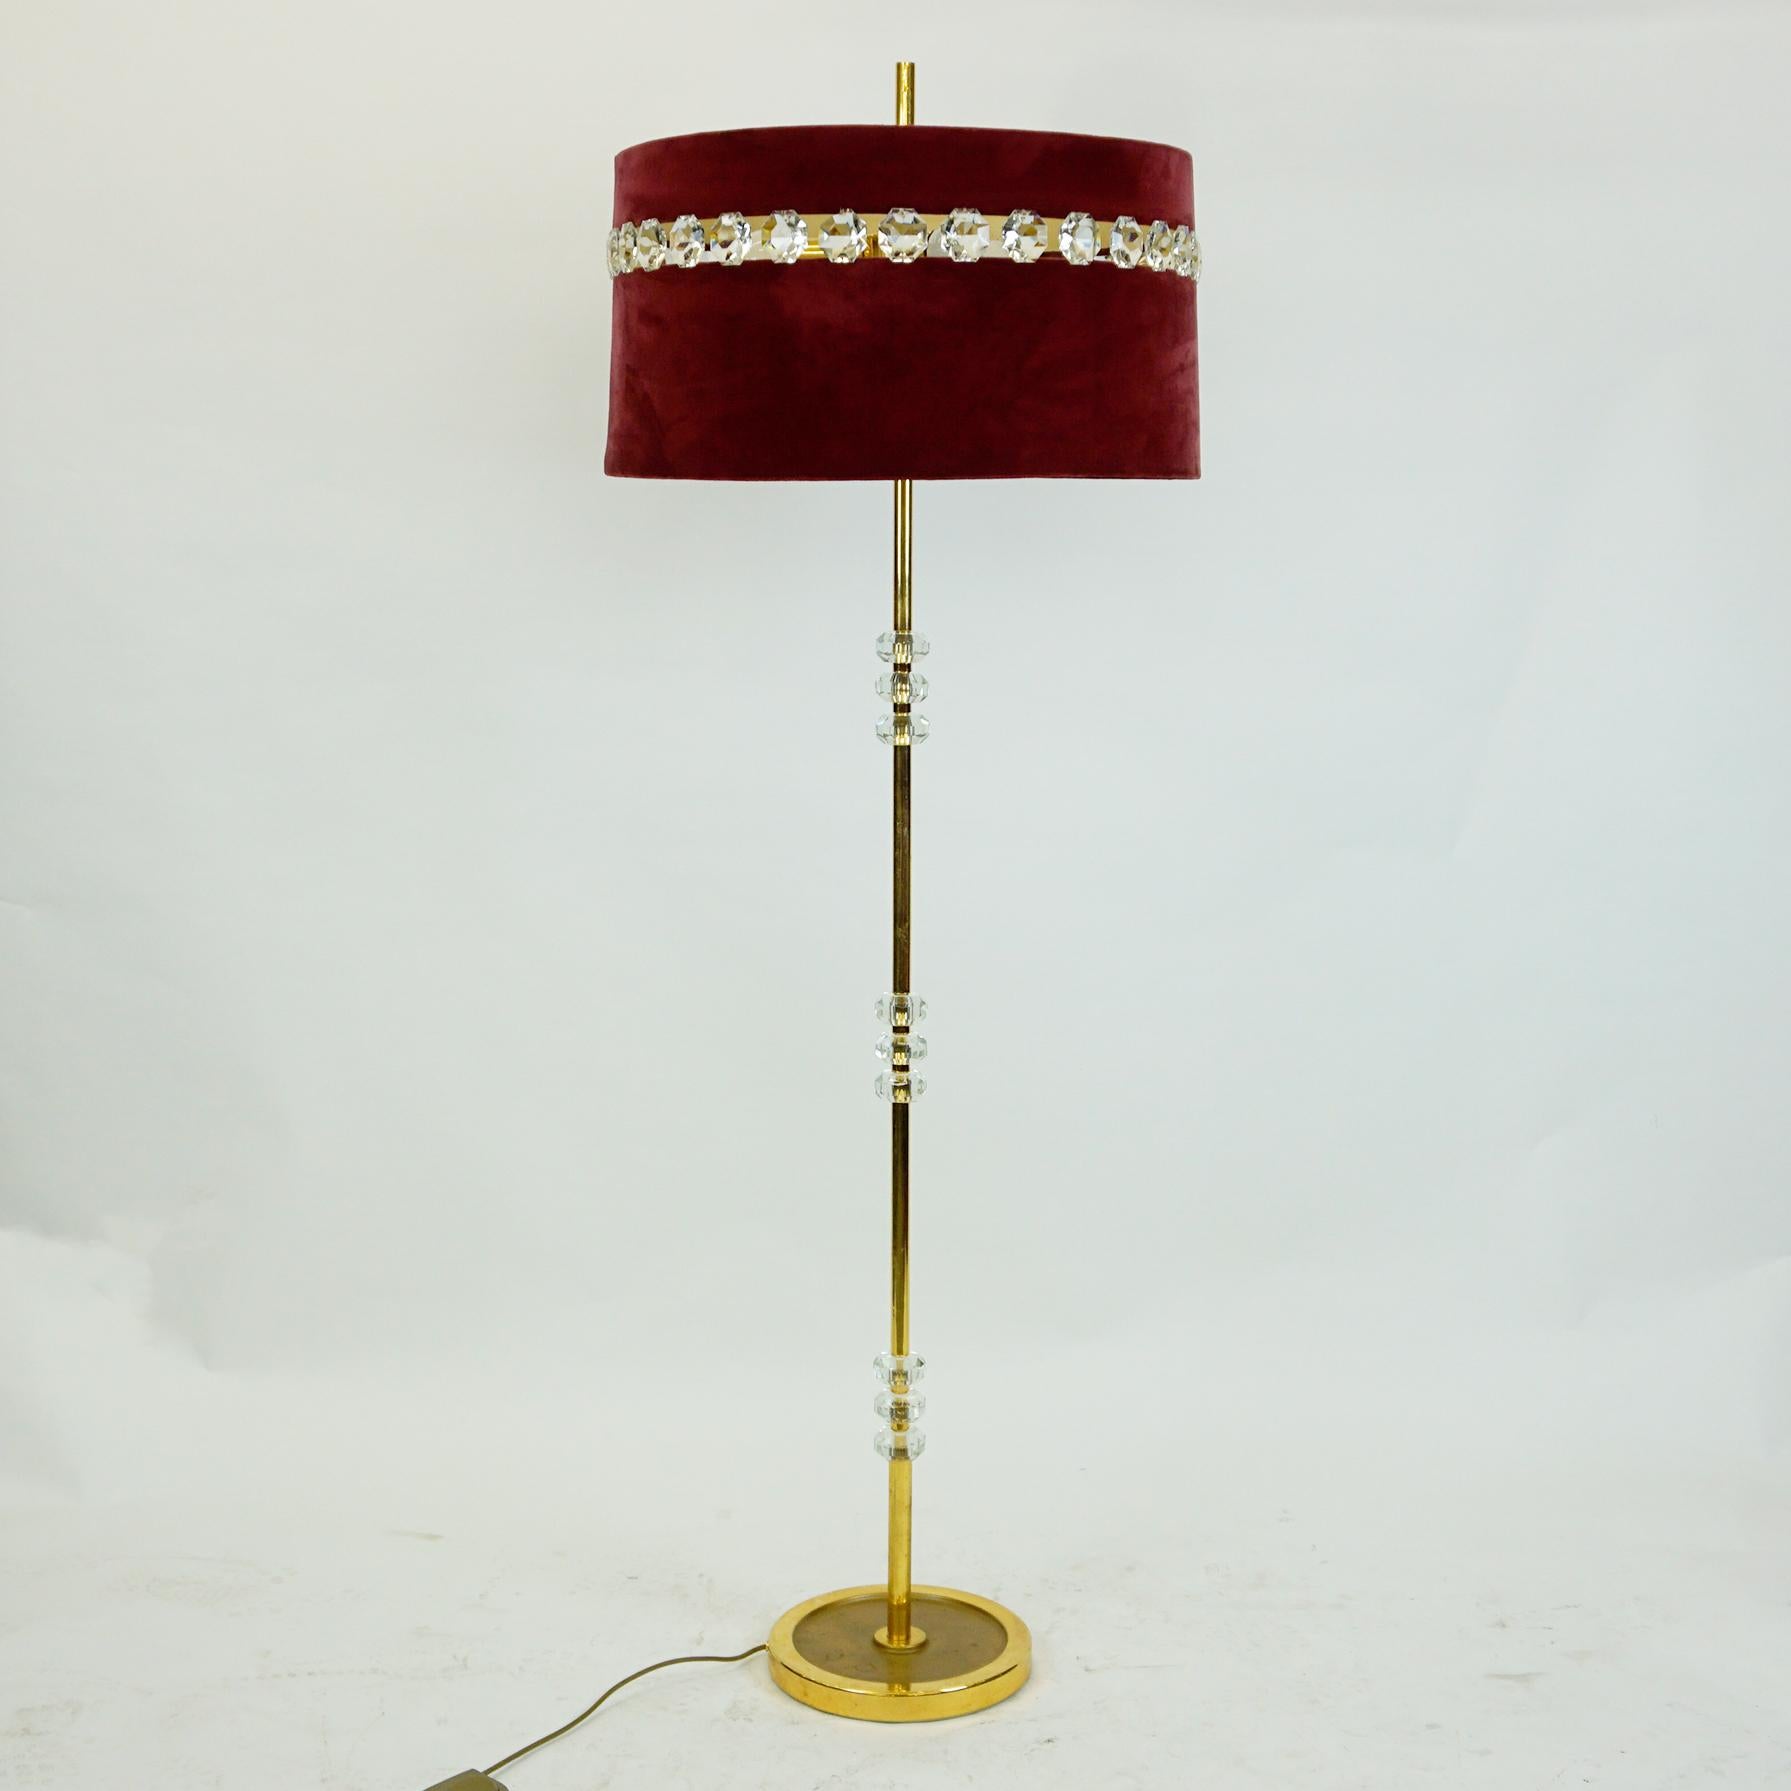 Outstanding example of elegant Austrian midcentury brass floor lamp attributed to J. & L. Lobmeyr, Vienna. It features a gilded brass construction with integrated crystal glass elements combined with detailed metal work and three E27 Light sockets.